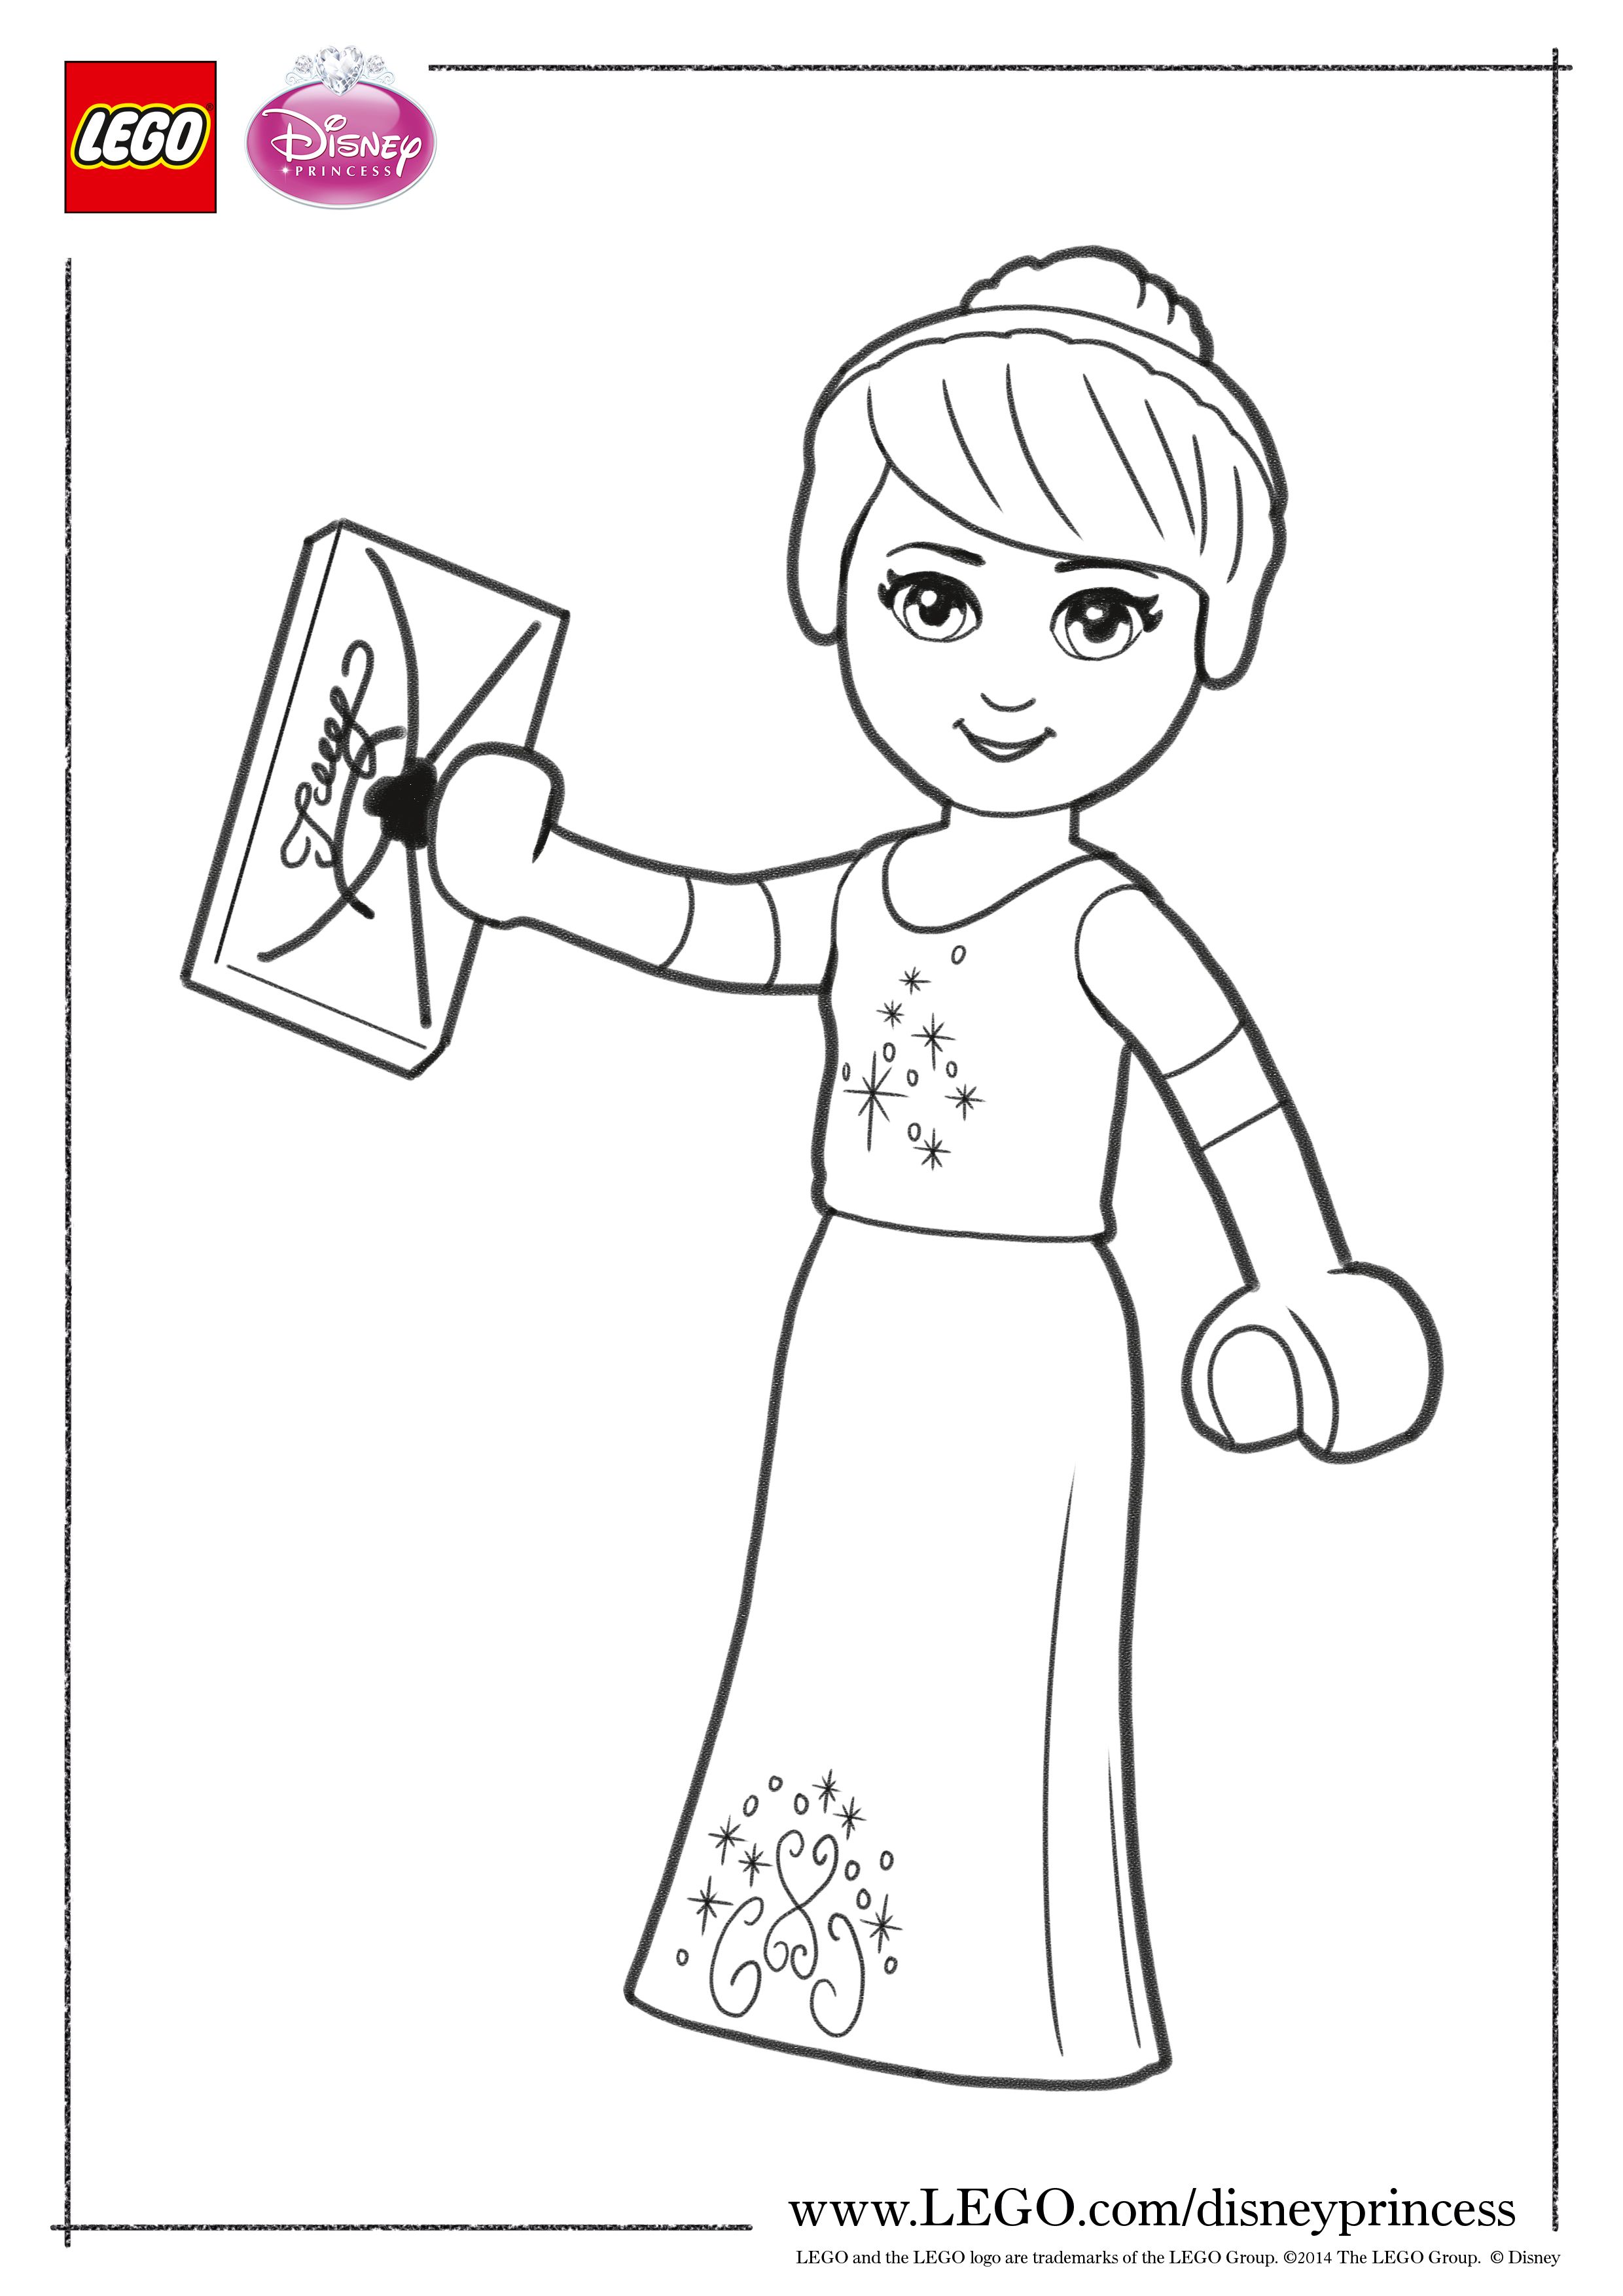 Lego Disney Princesses Coloring Pages   Coloring Home